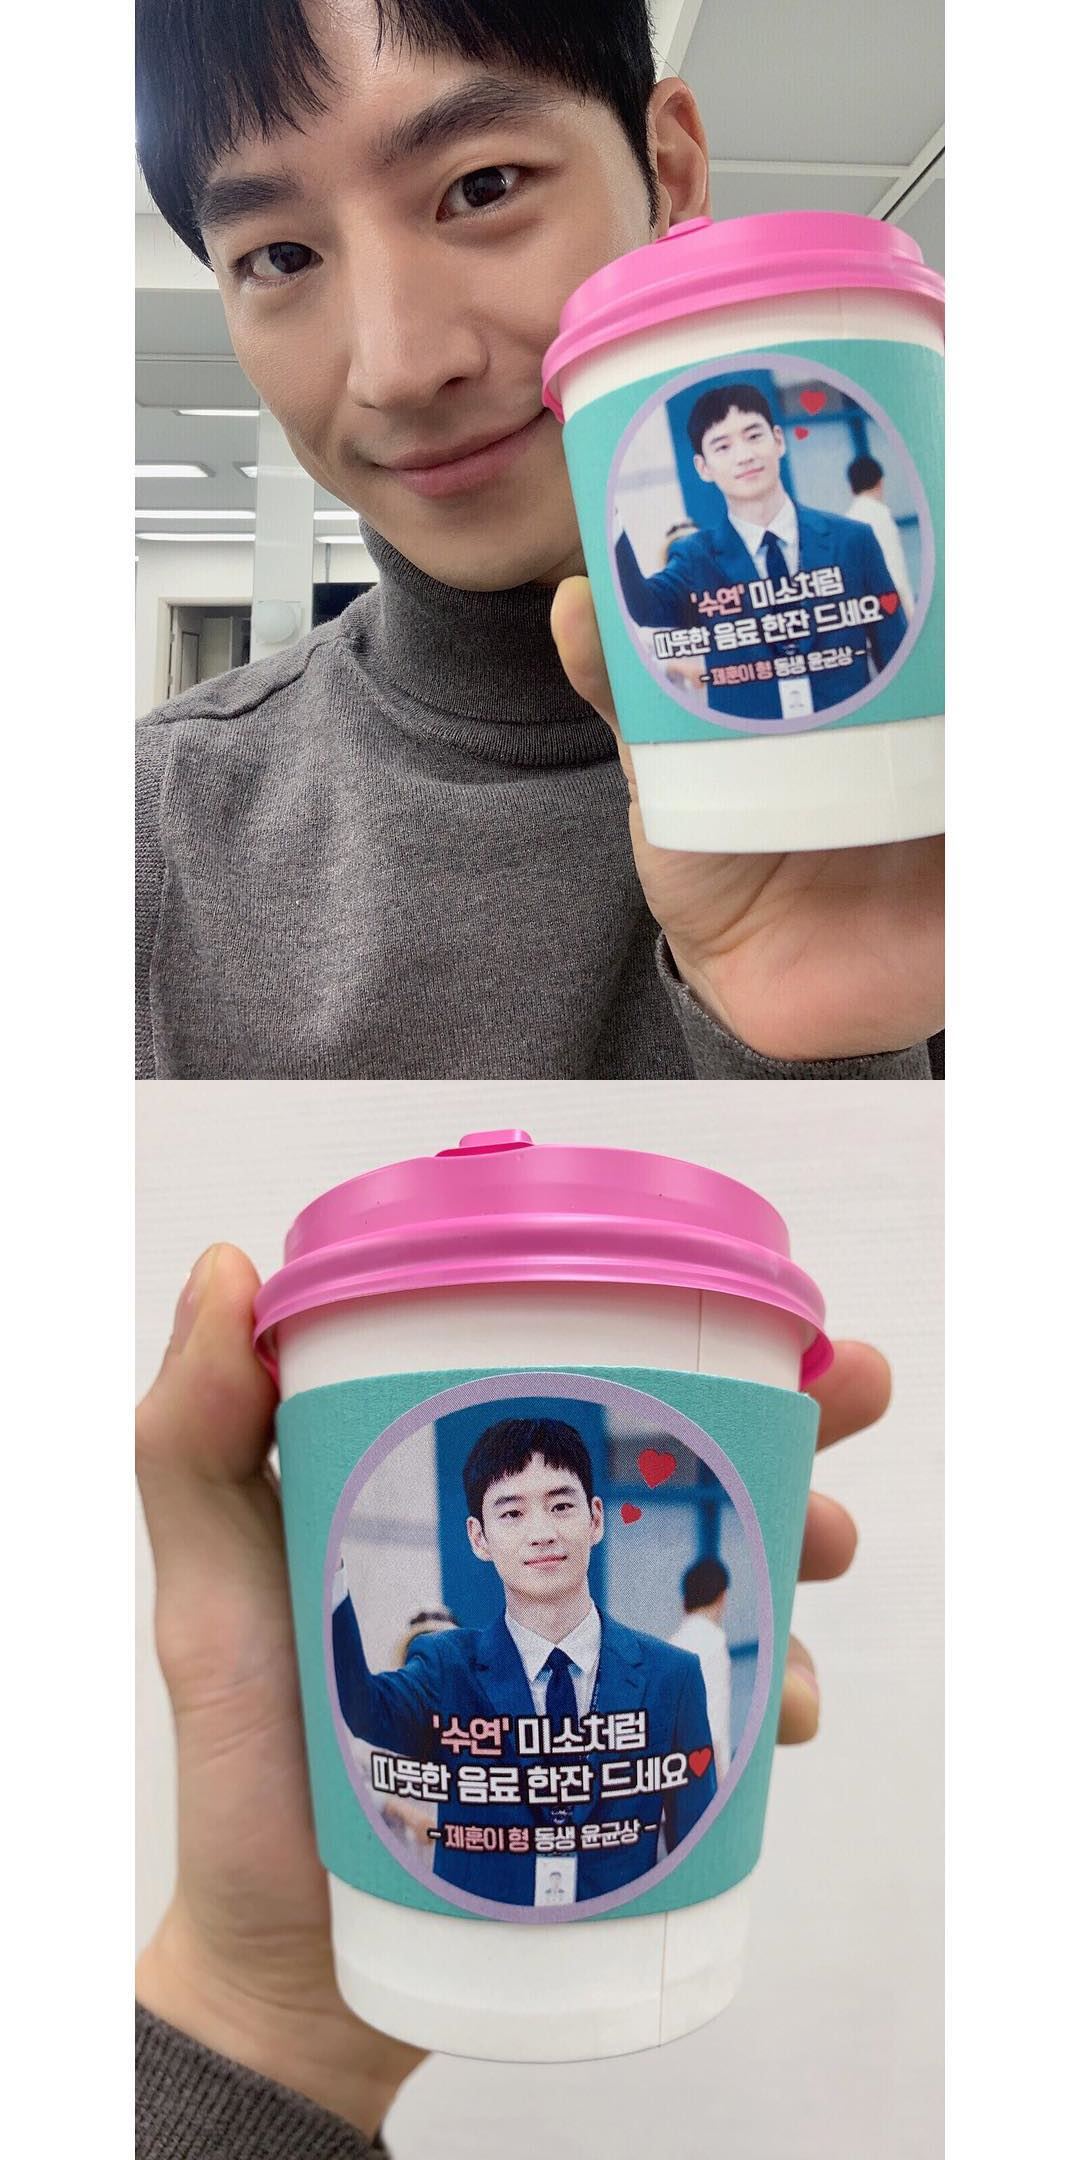 Ill drink well.Actor Lee Je-hoon drinks Celebratory photoOn the 21st, Lee Je-hoon released the phrase Thank you for the fungus  ~ I will drink well # Samshi Sekisui and self-portrait through the official Instagram.In the photo he stares at the camera with a drink that Yoon Kyun-sang appears to have Gifted.Lee Je-hoon is currently in the hot spot playing Lee Soo-yeon in SBS Monday Drama Foxgaks. / Photo = Lee Je-hoon Official Instagram